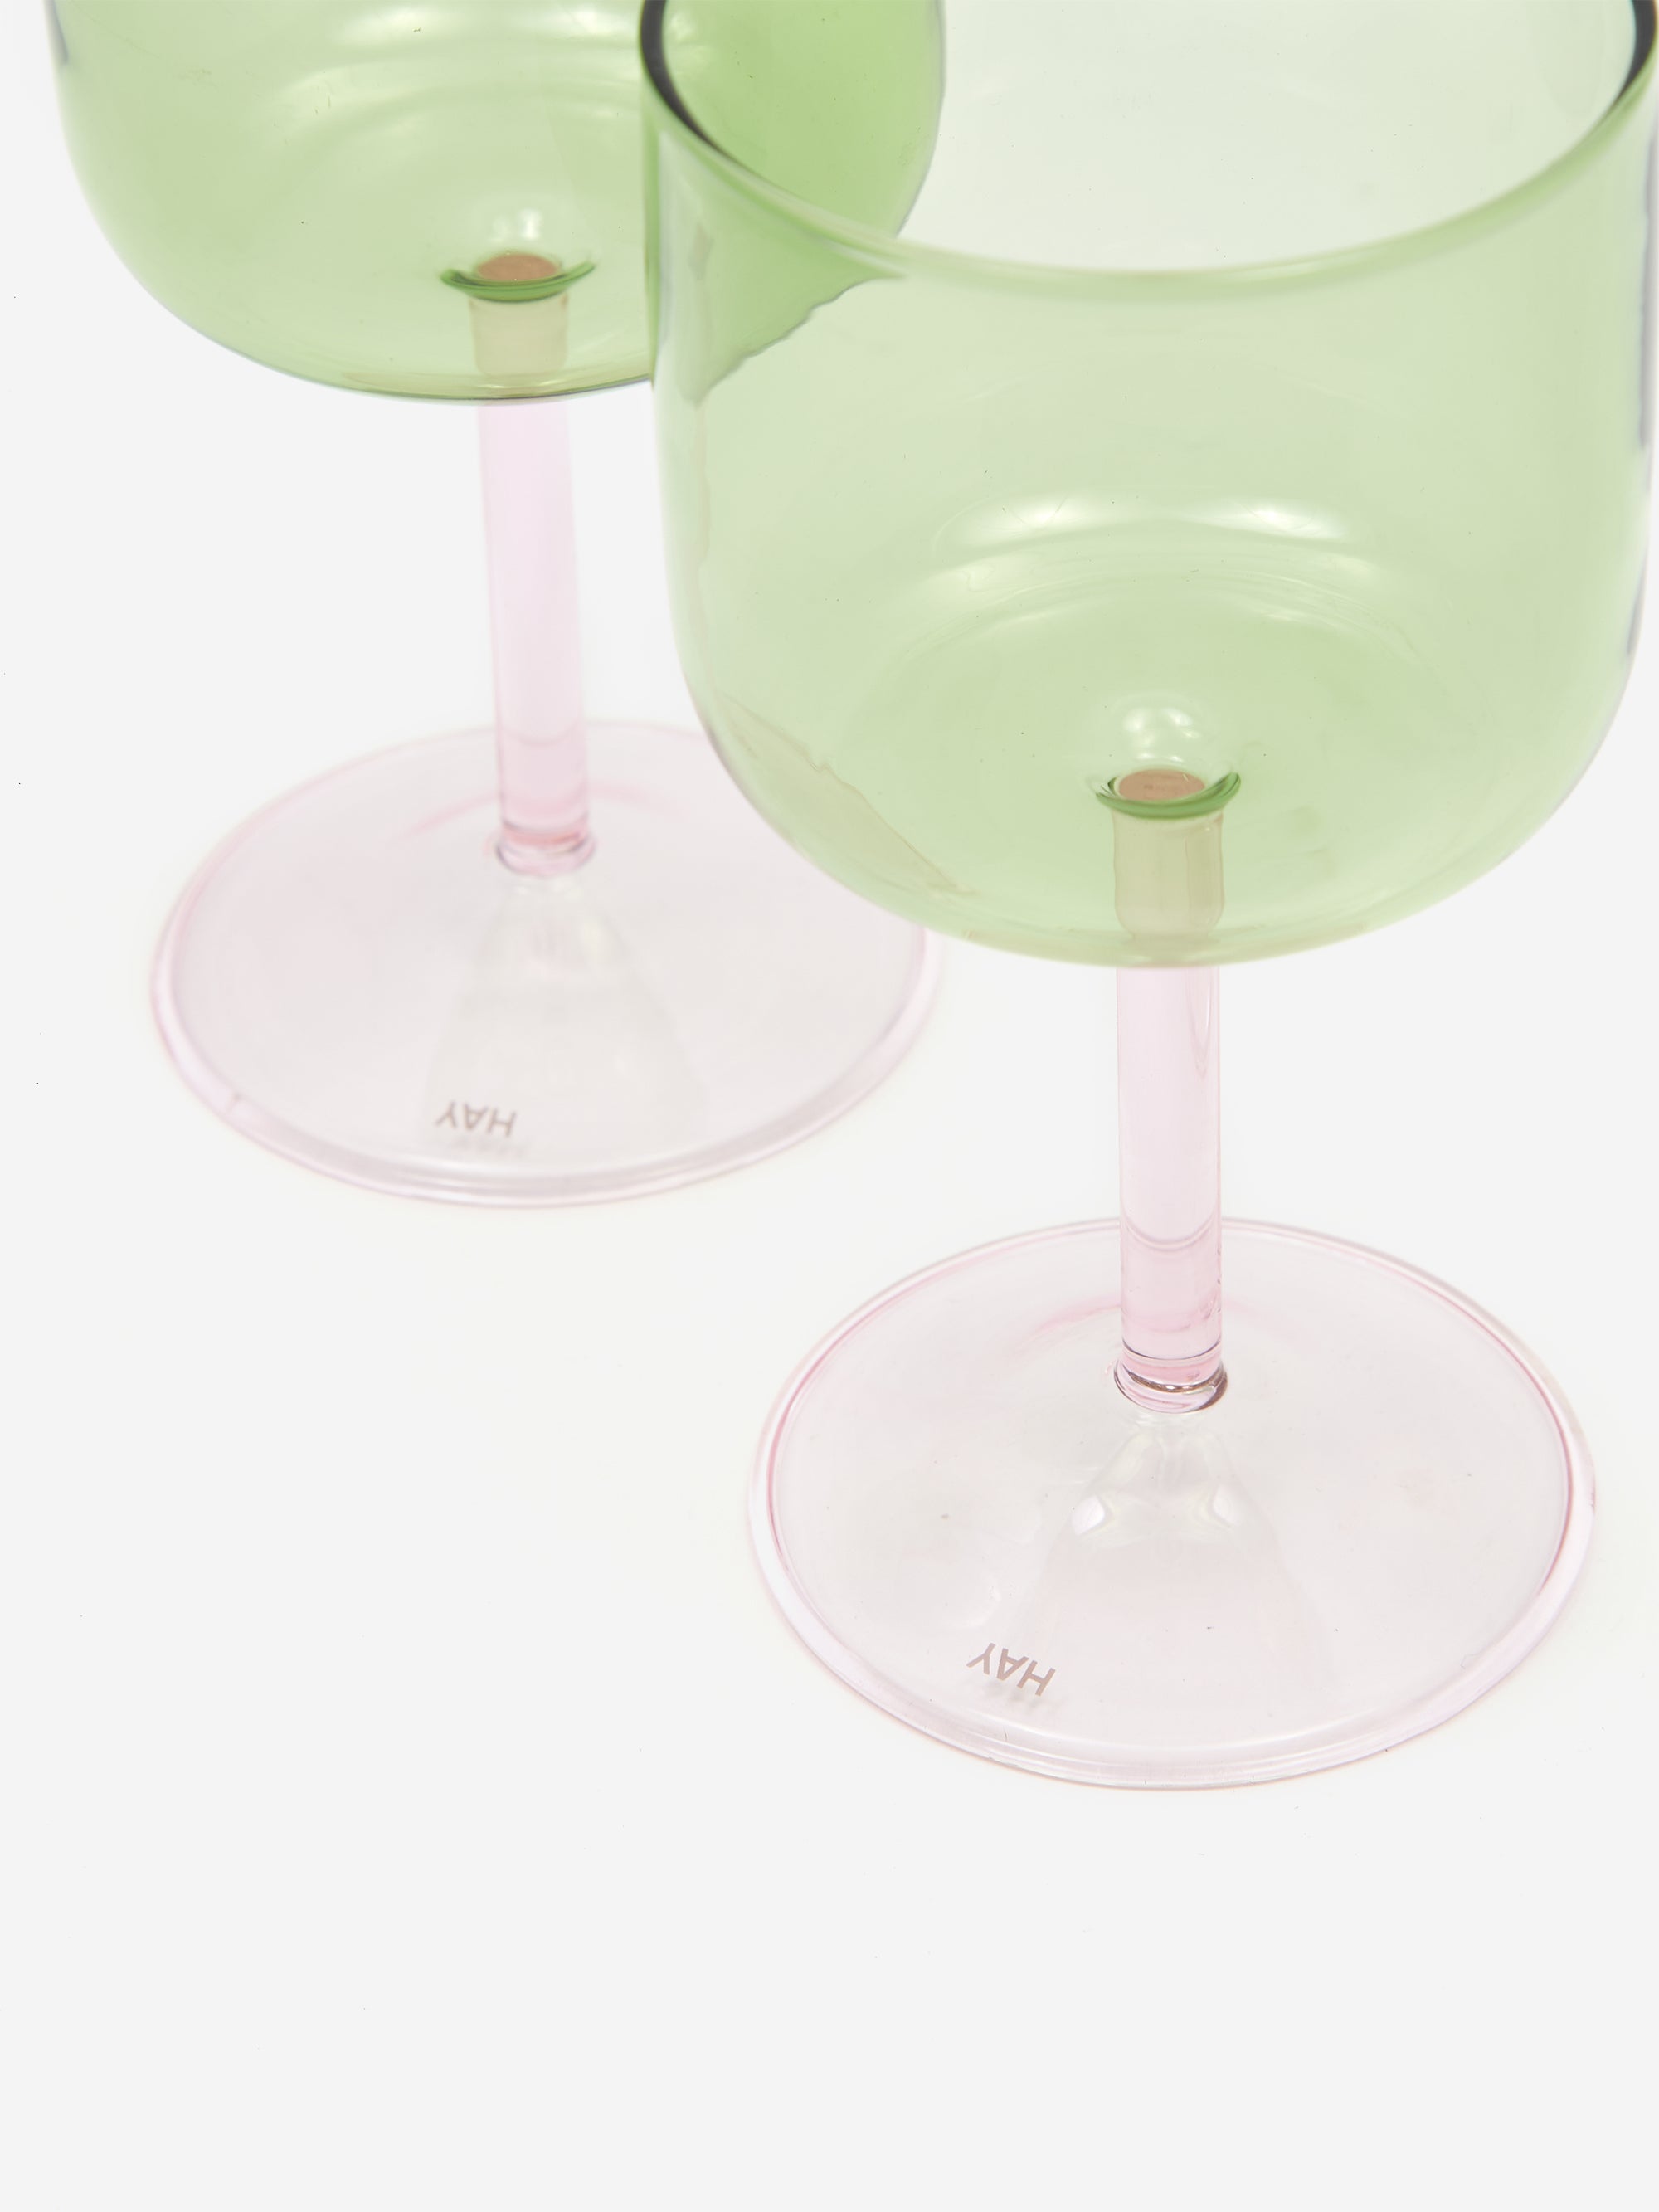 HAY Tint Wine Glass Set of 2Glass Or Pitcher - DESIGN+ART HAY